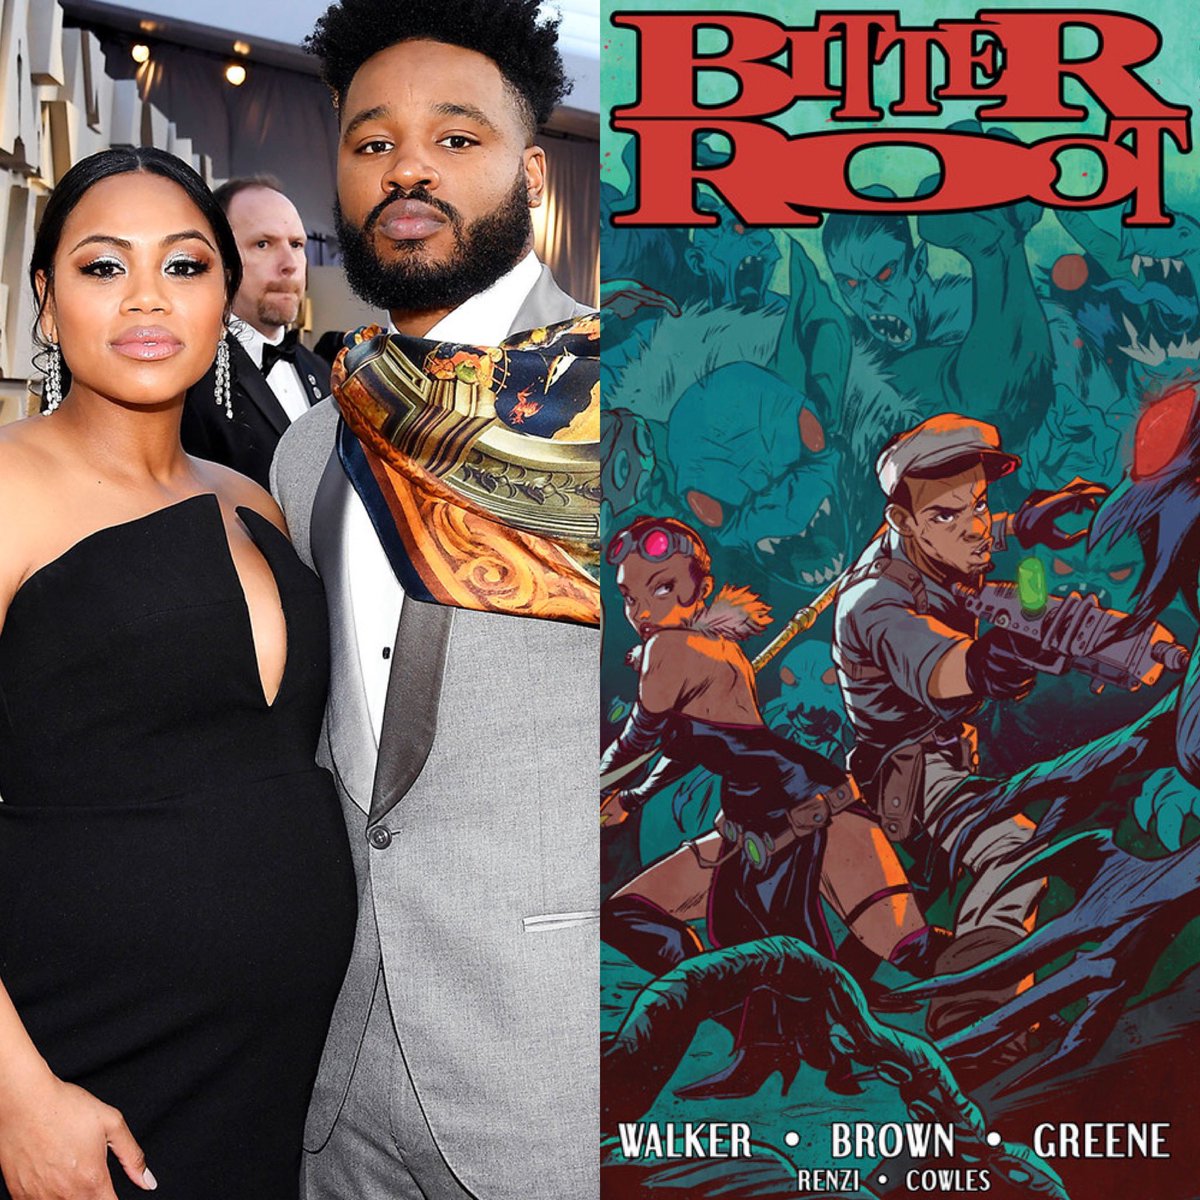 #NOiRNews: ‘Black Panther’ film director #RyanCoogler, and wife/producer and director, #ZinziEvans, are set to produce a live-action movie adaption of the iconic @imagecomics series, ‘Bitter Root’!

#noirnews #noircaesar #ryancoogler #zinzievans #bitteroot #imagecomics